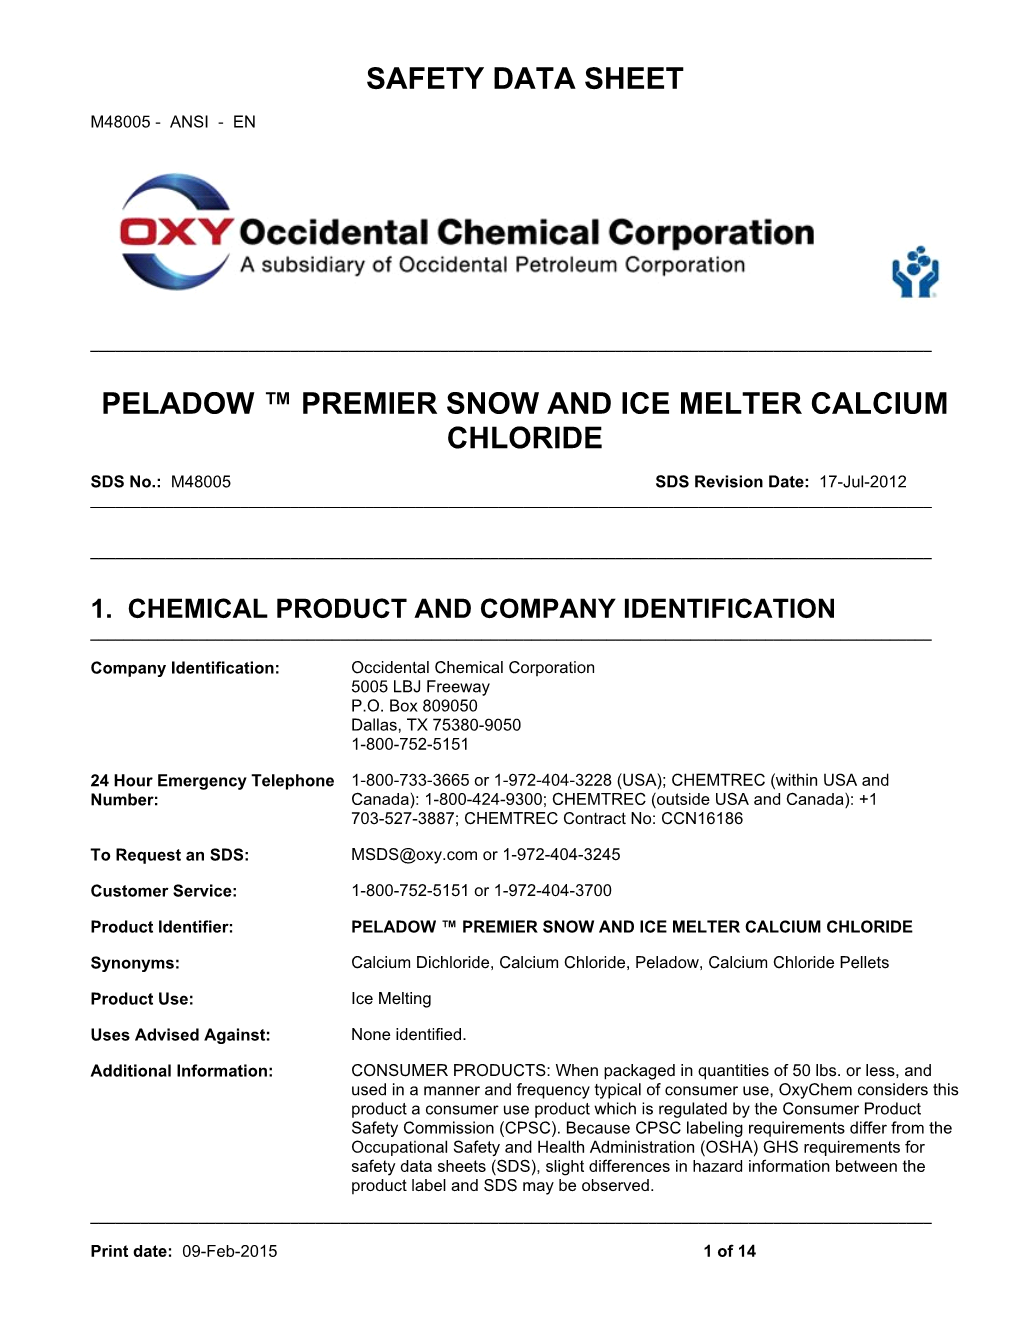 PELADOW Premier Snow and Ice Melter with Calcium Chloride